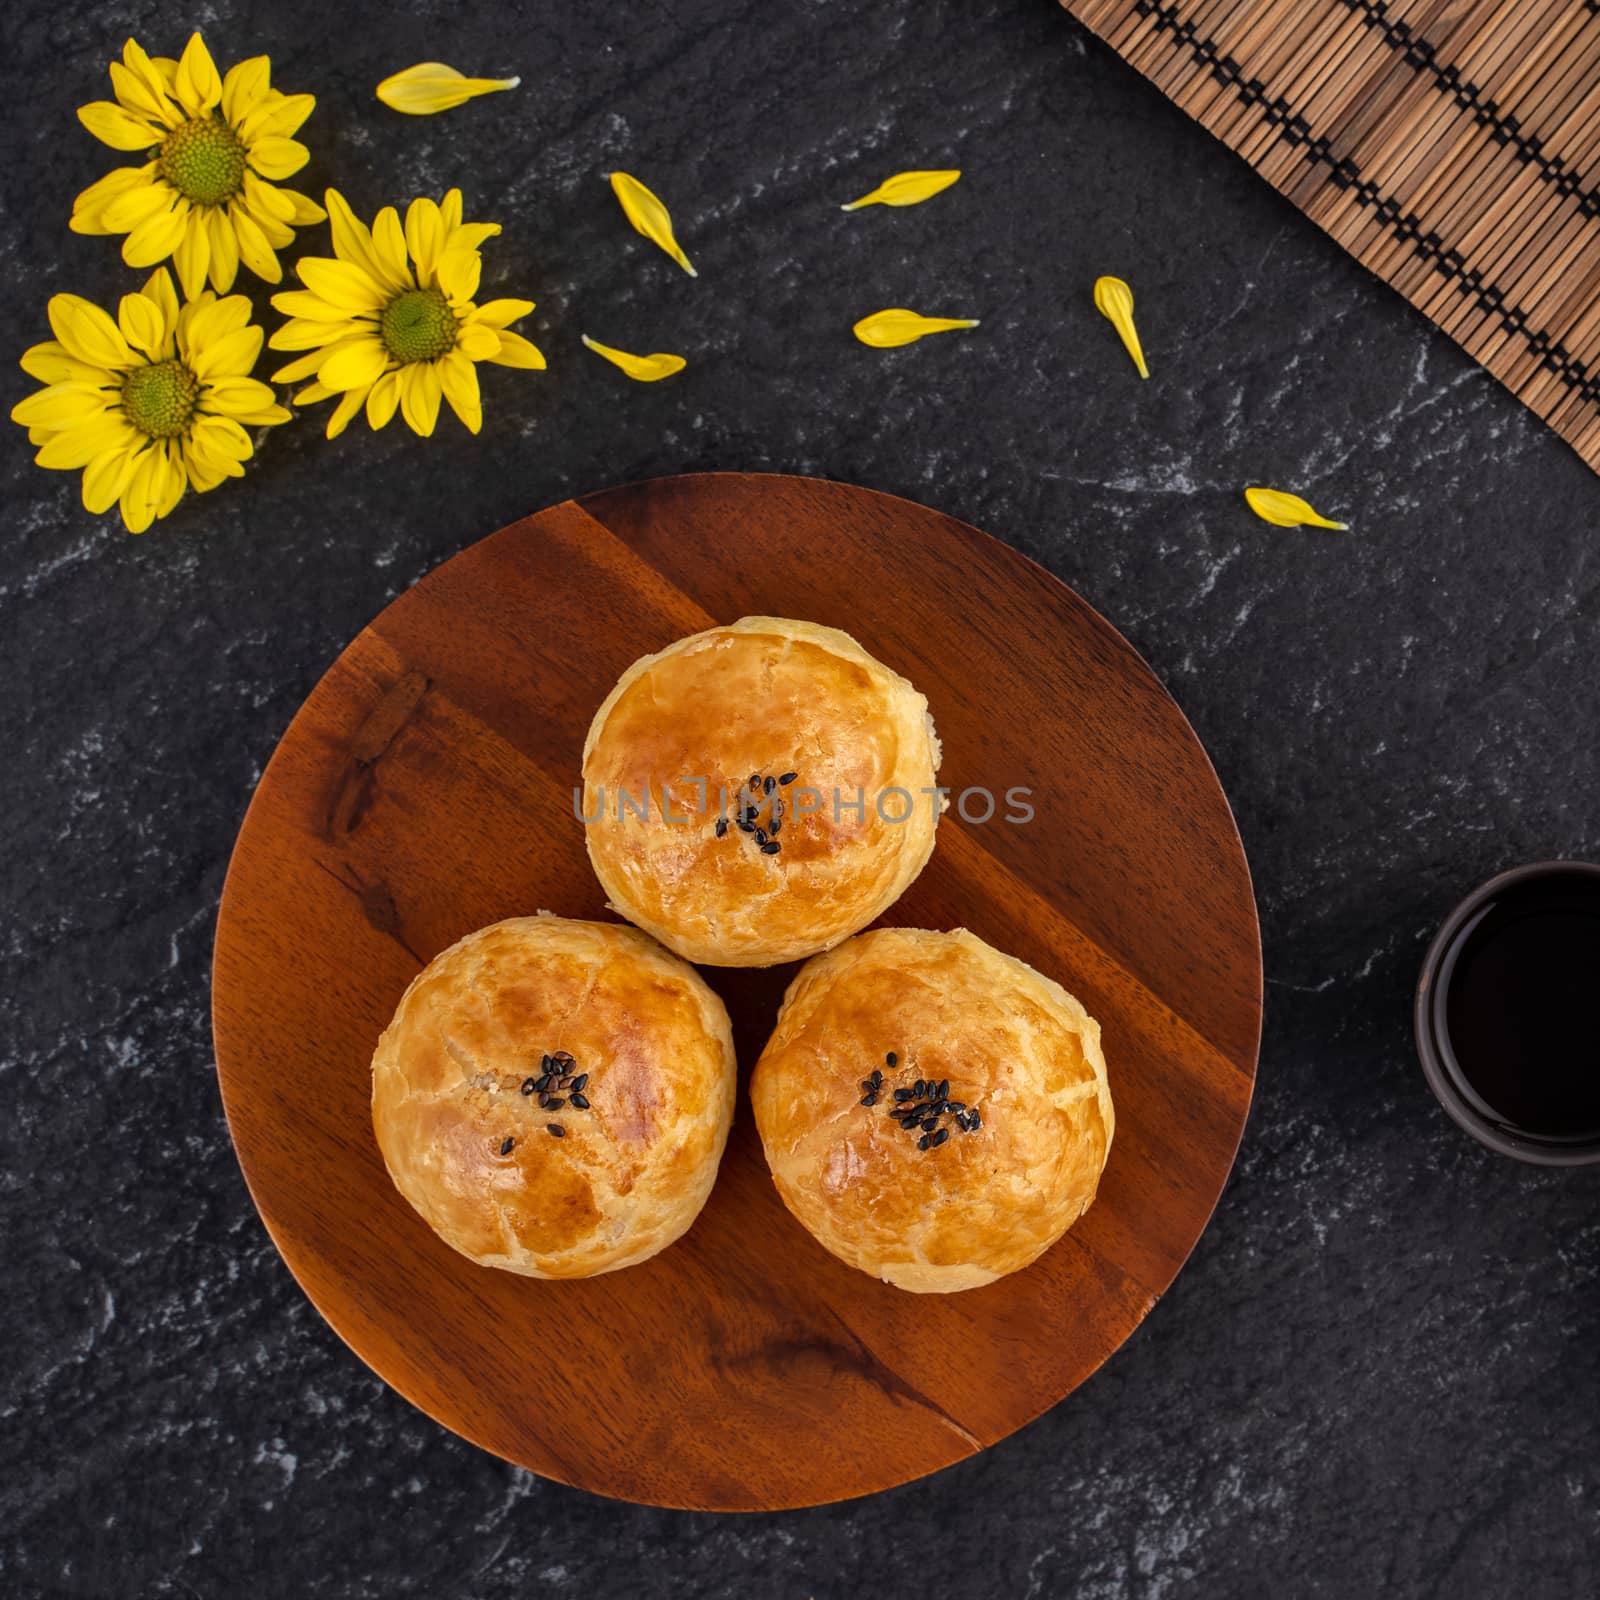 Moon cake yolk pastry, mooncake for Mid-Autumn Festival holiday, top view design concept on dark wooden table with copy space, flat lay, overhead shot